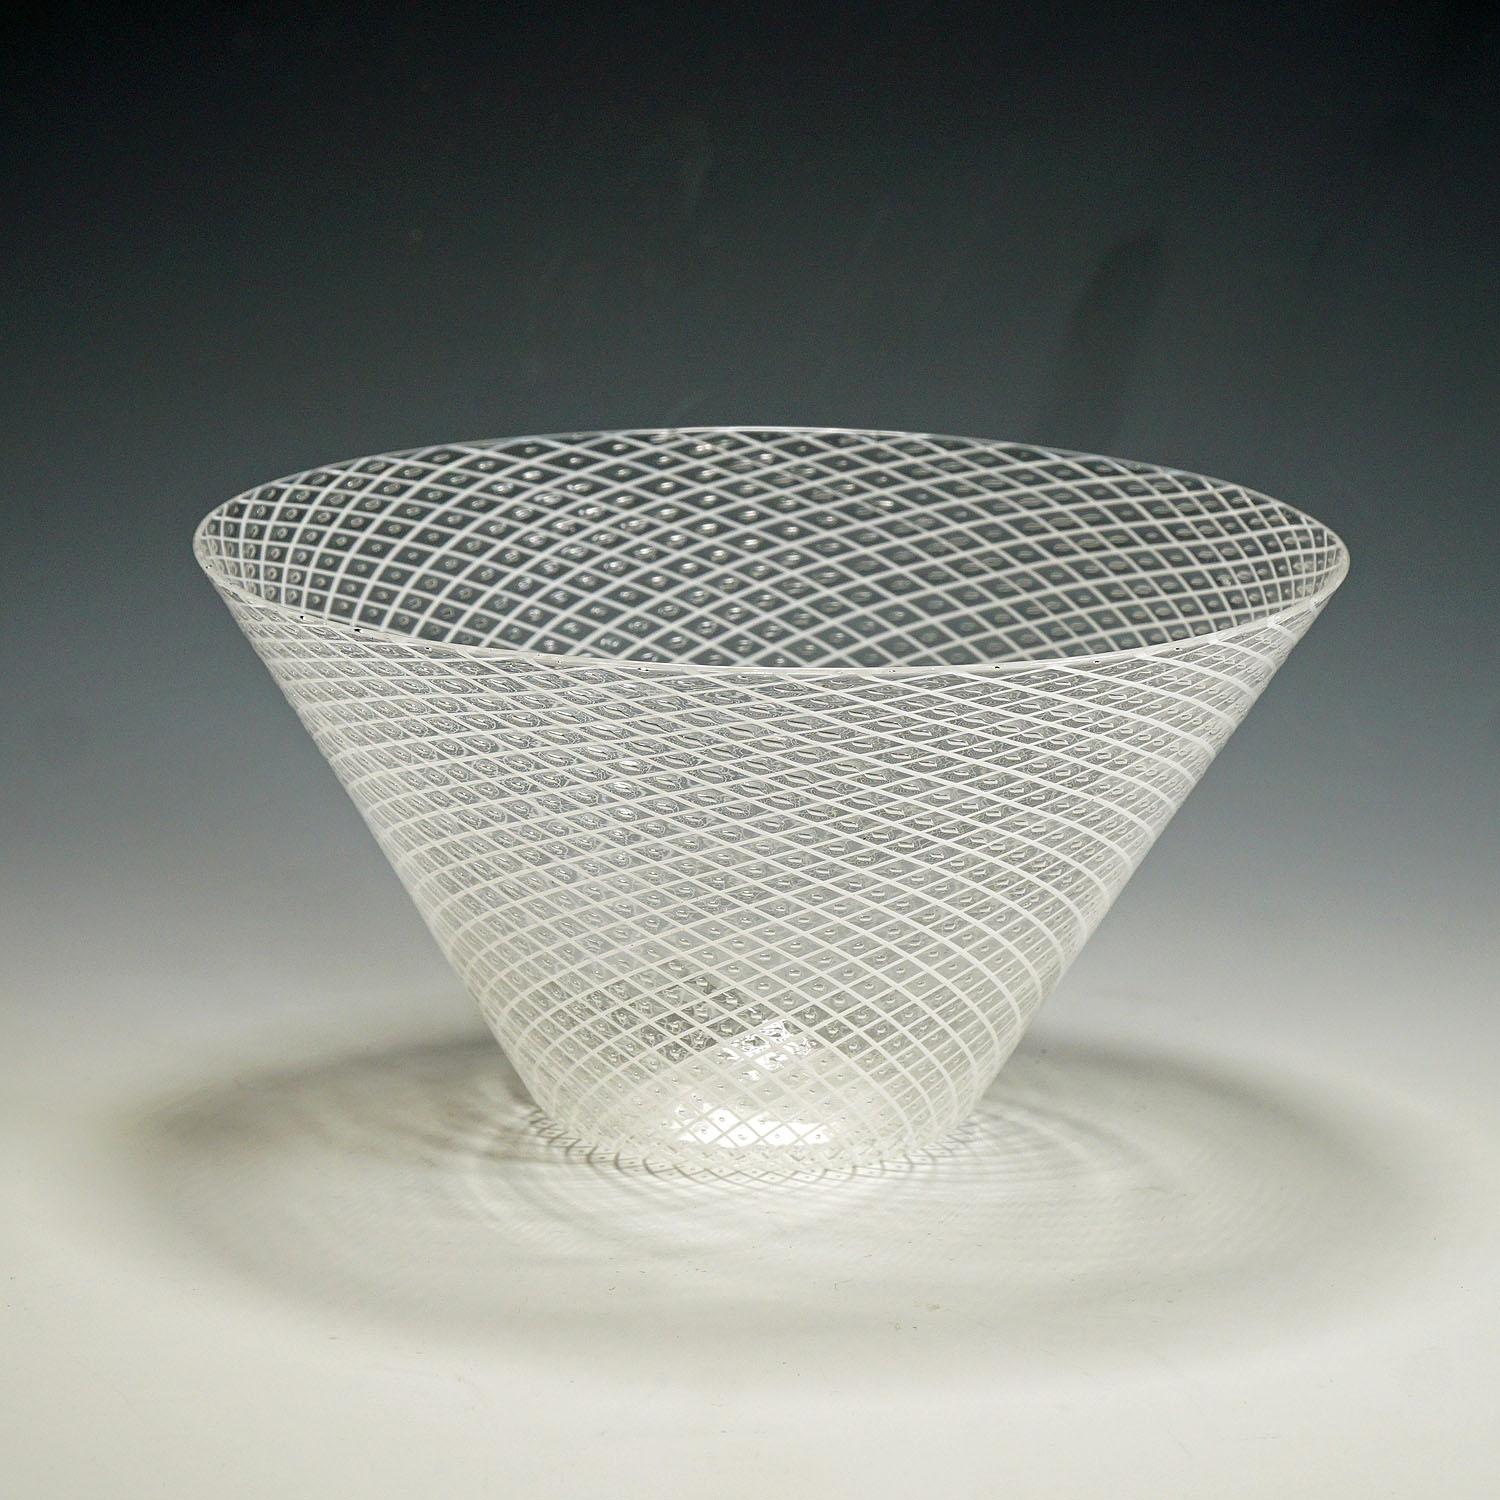 A vintage Murano art glass bowl in reticello technique. Thin clear glass with crossed white glass threads and regular air bubbles inbetween. Manufactured by Barovier & Toso around 1950s. Polished pontil mark and incised signature 